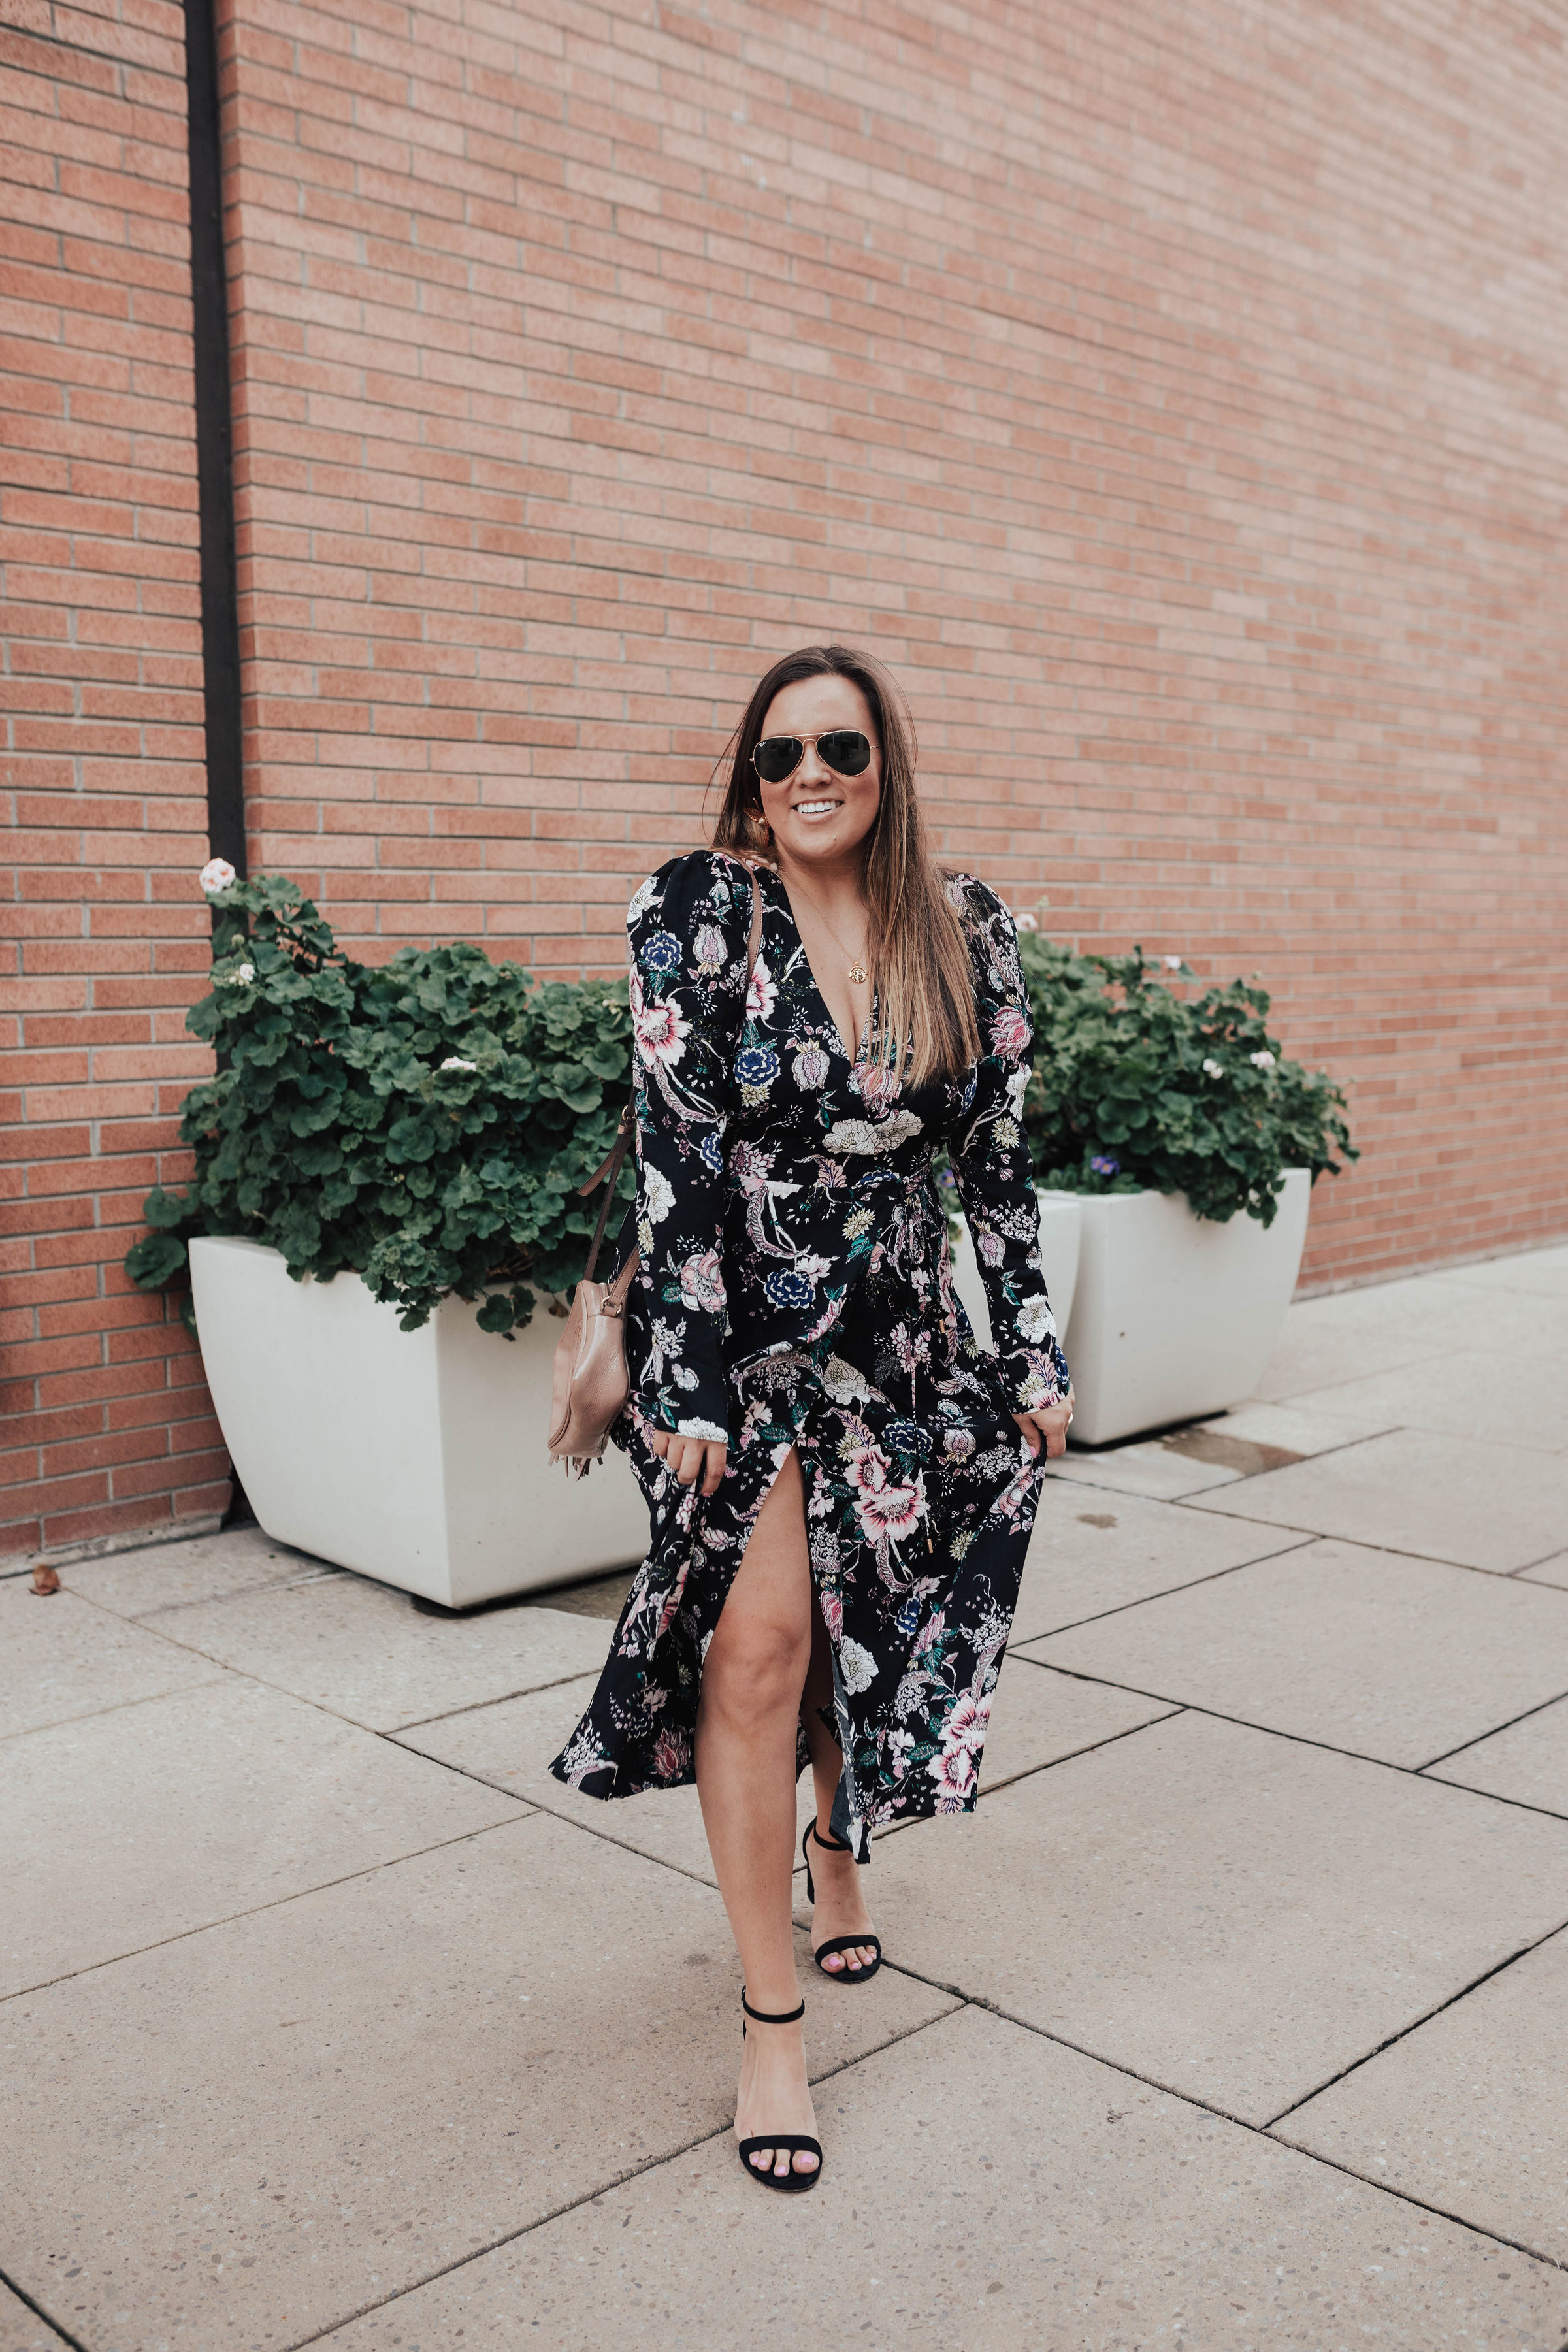 San Francisco blogger, Ashley Zeal from Two Peas in a Prada shares her favorite bridal shower dresses. She chose the best for the bride, and those attending a shower!